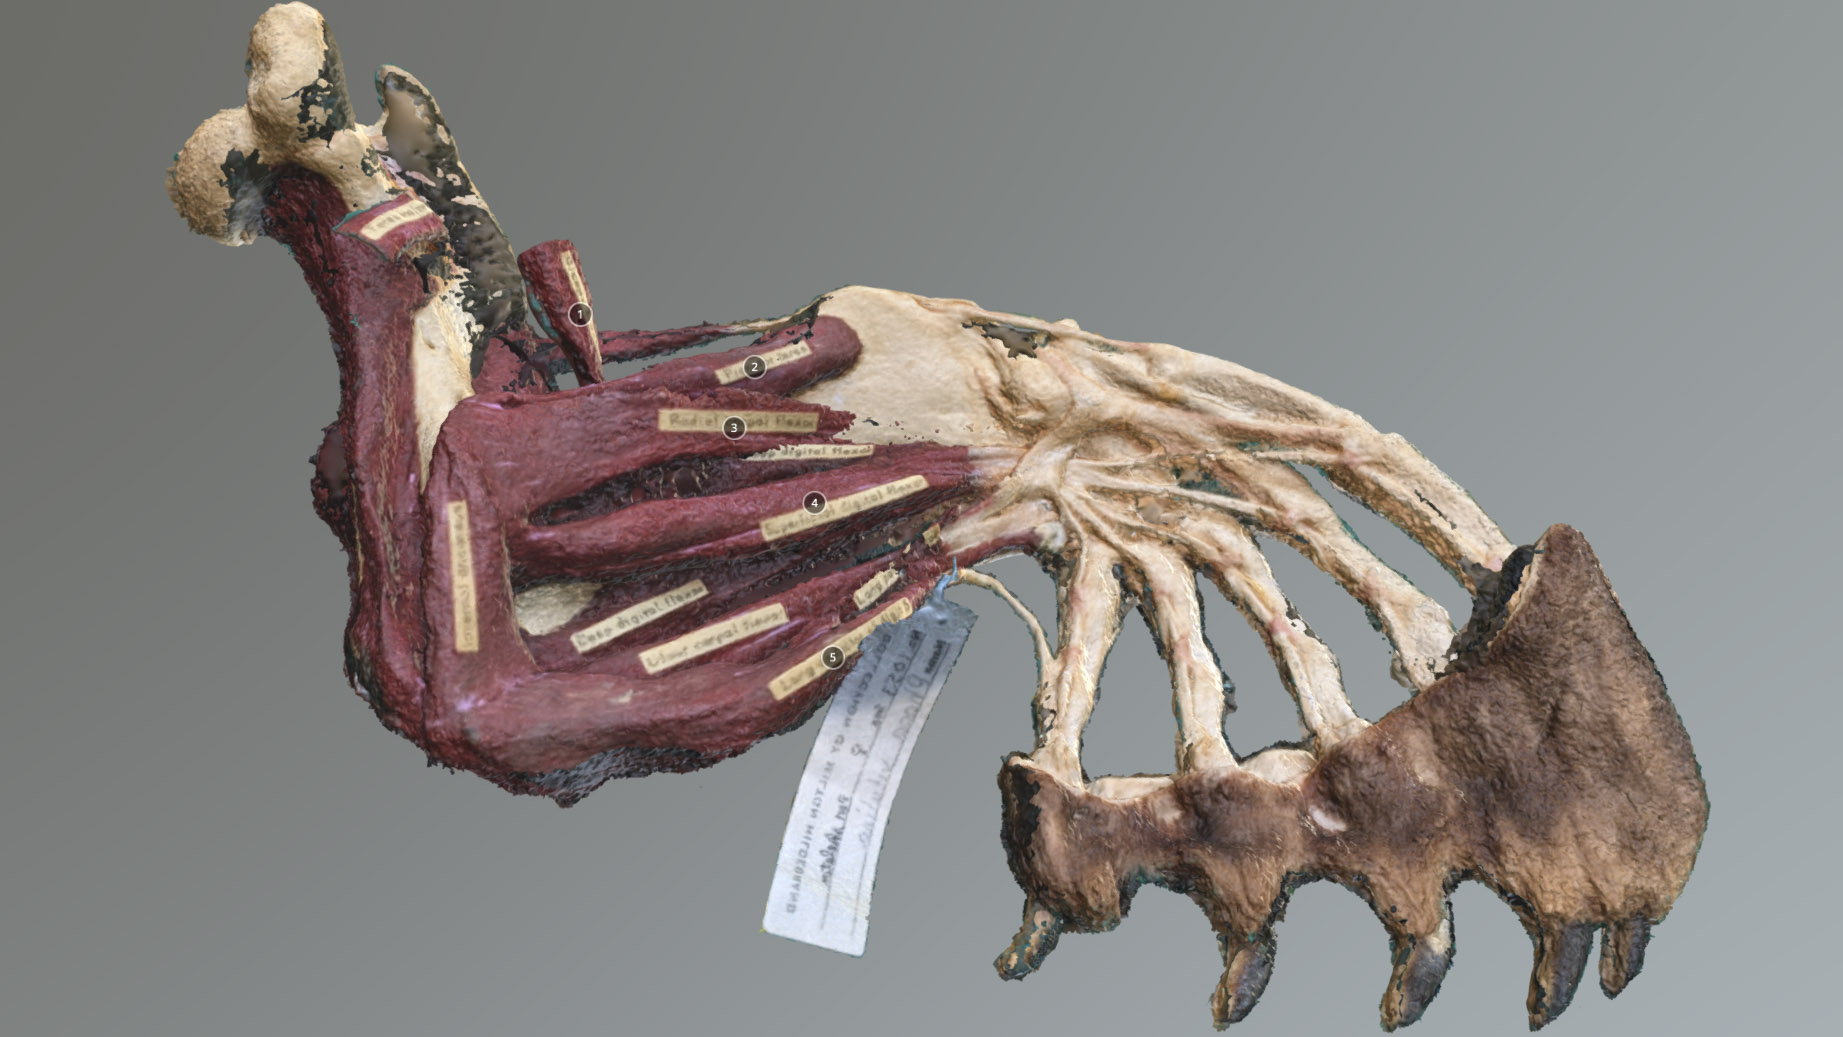 seal flipper with visible red muscles, white bones and fur and nails at tip